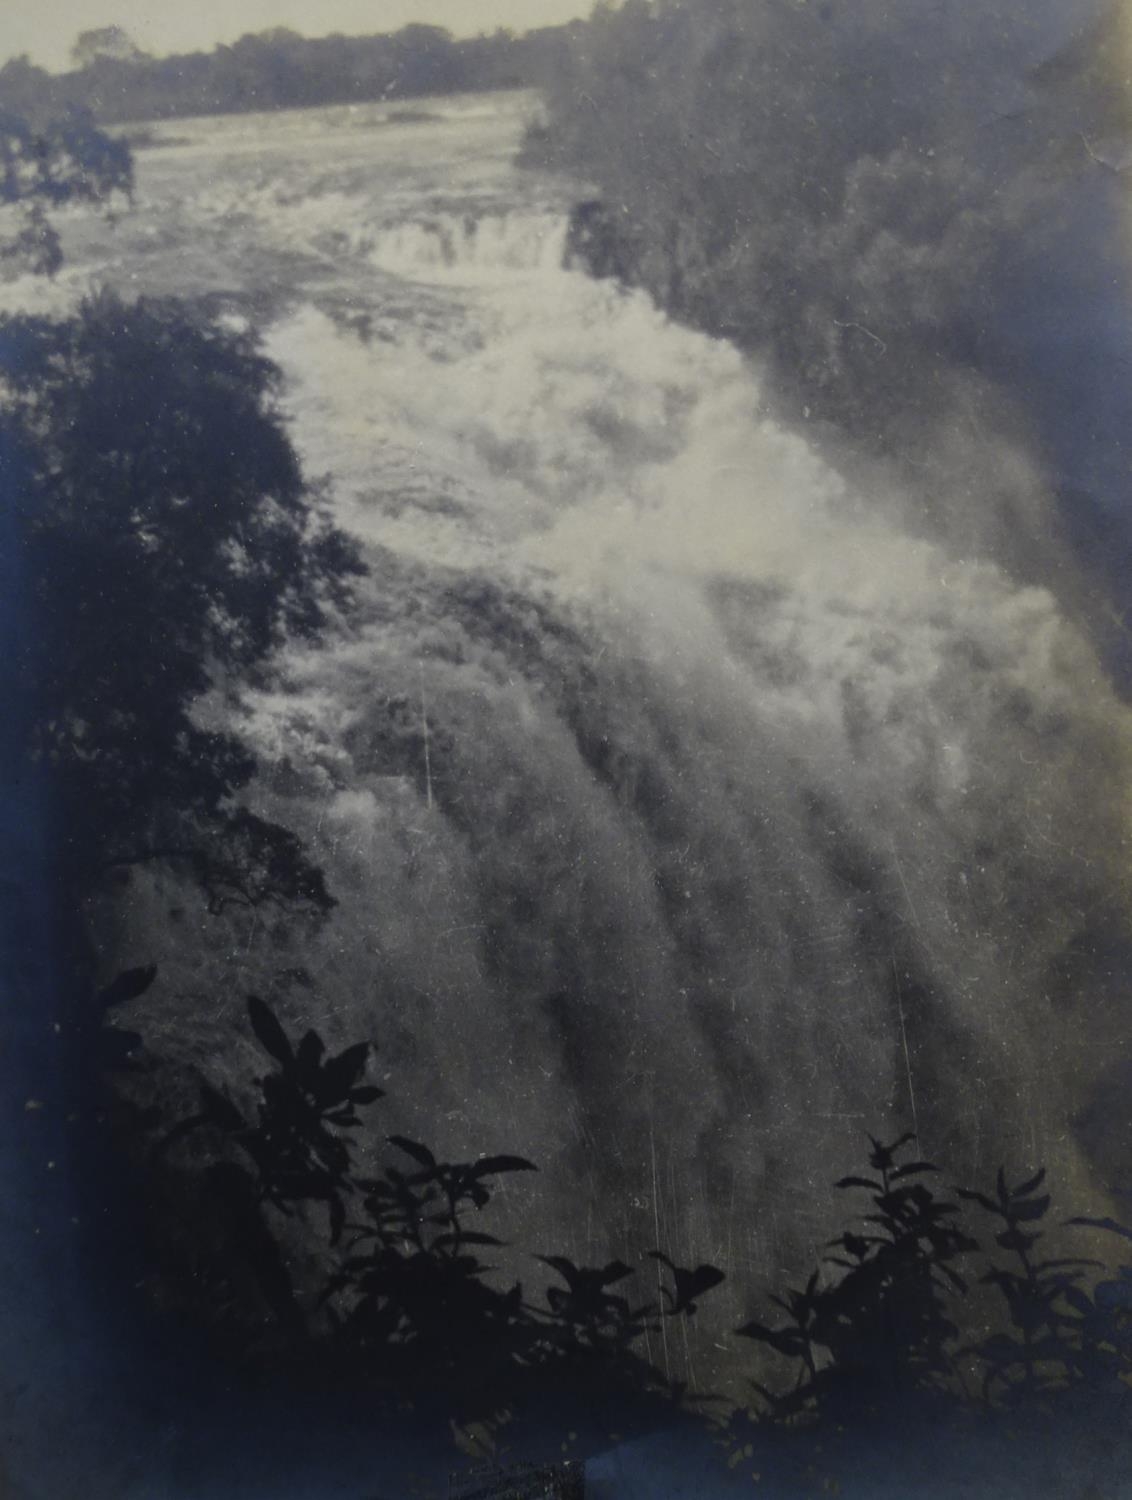 Photograph - an old Silver gelatin photograph labelled verso ? Victoria Falls, Devils Cataract?.